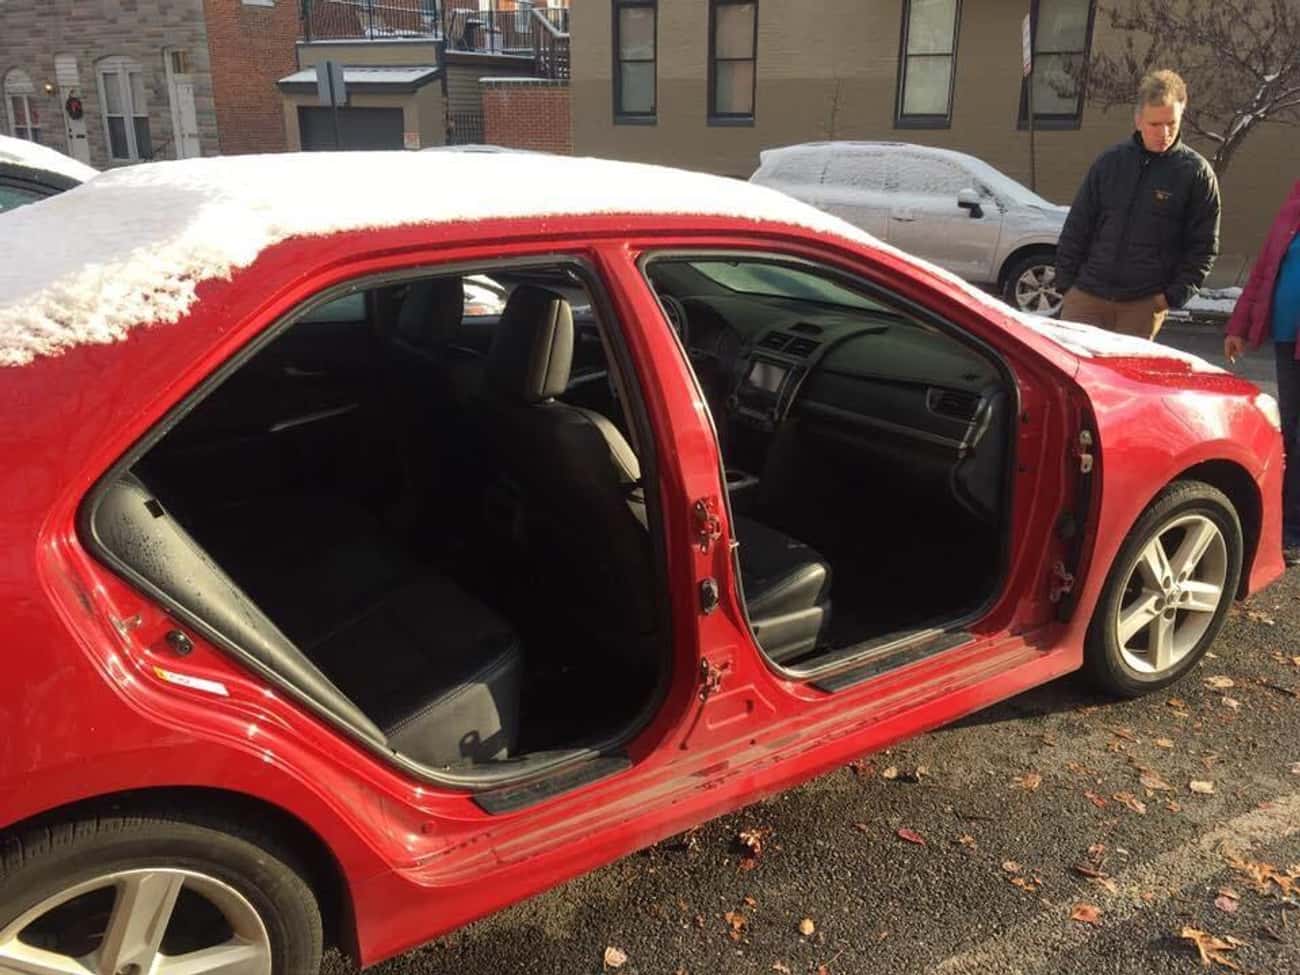 "Someone Stole The Doors Off A Neighbors Car Last Night"